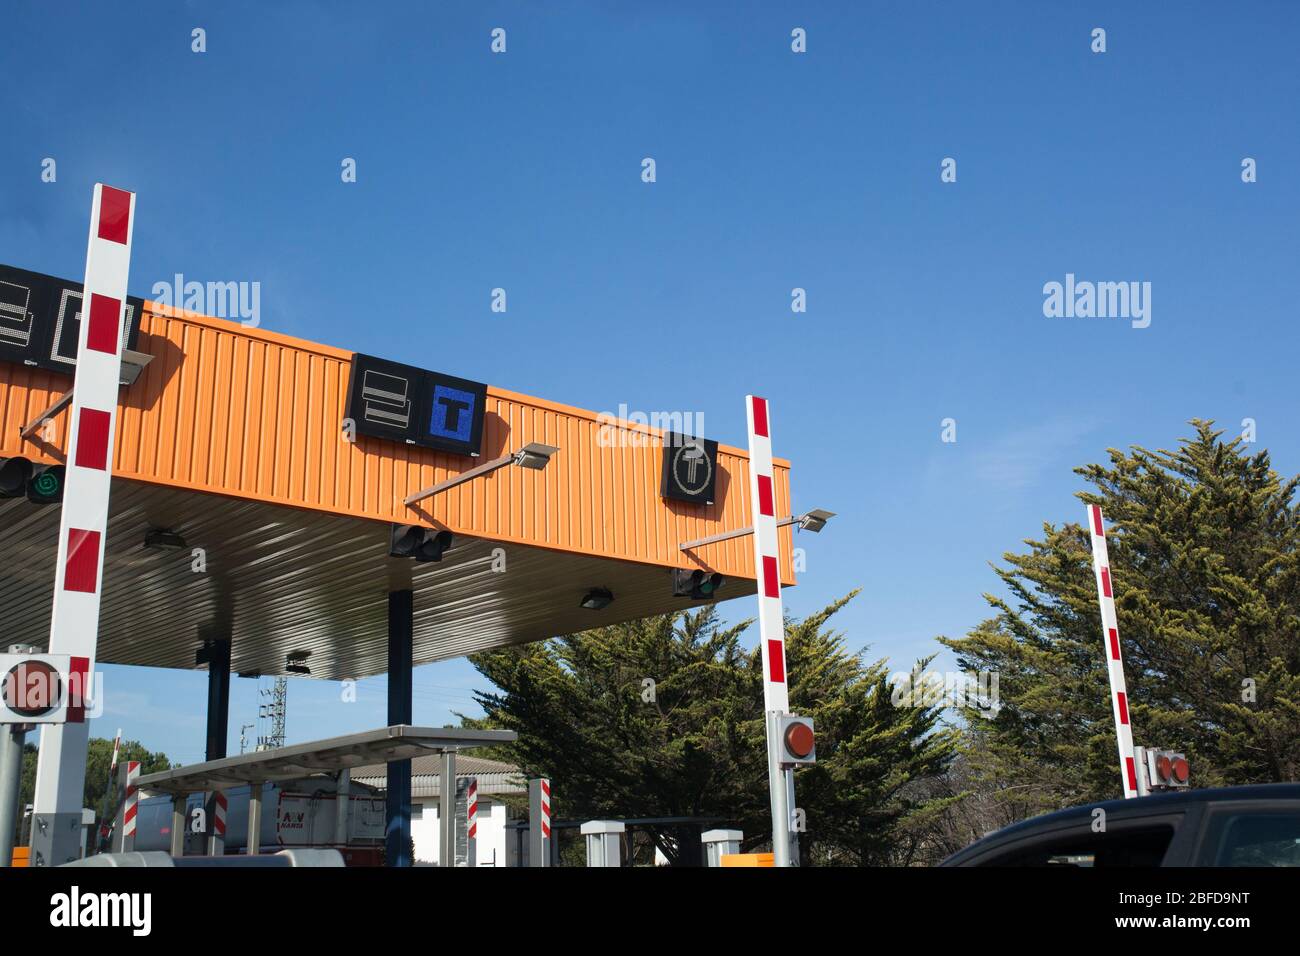 Payment system signals by credit card at highway toll gate. Daylight shot Stock Photo